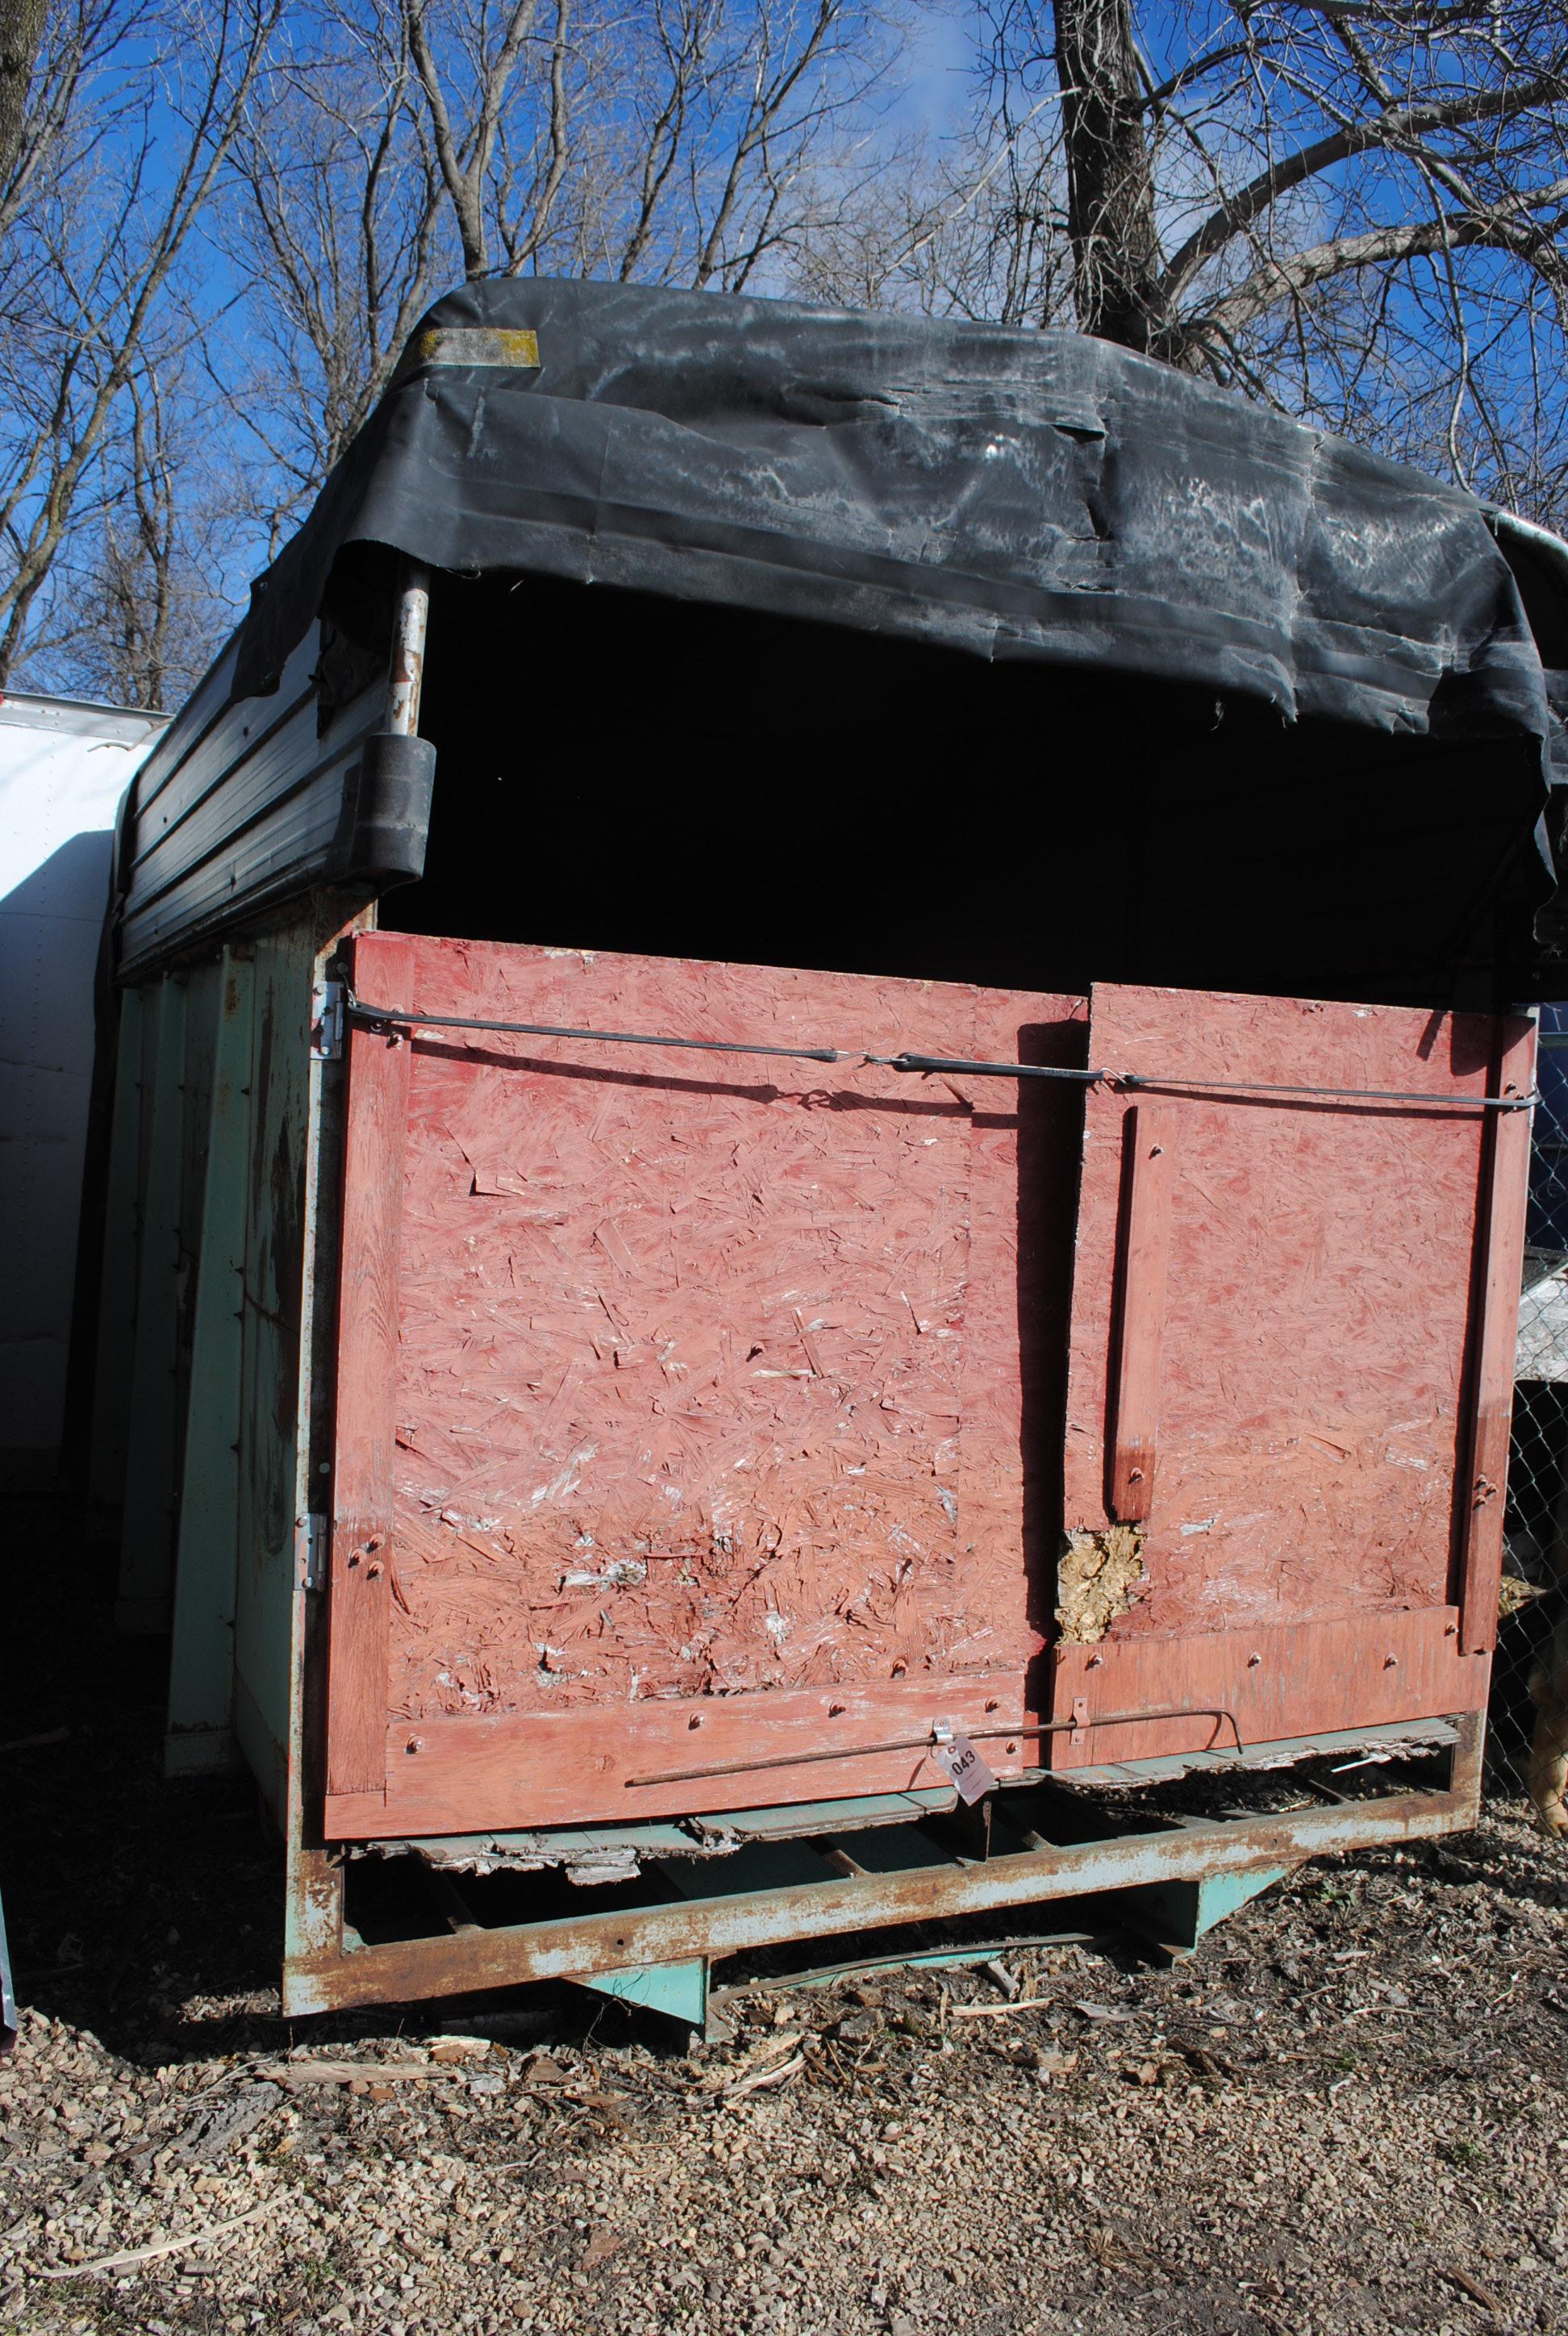 Chopper Box approx. 7-1/2'x13', was used for wood storage. Buyer is responsible for removal.